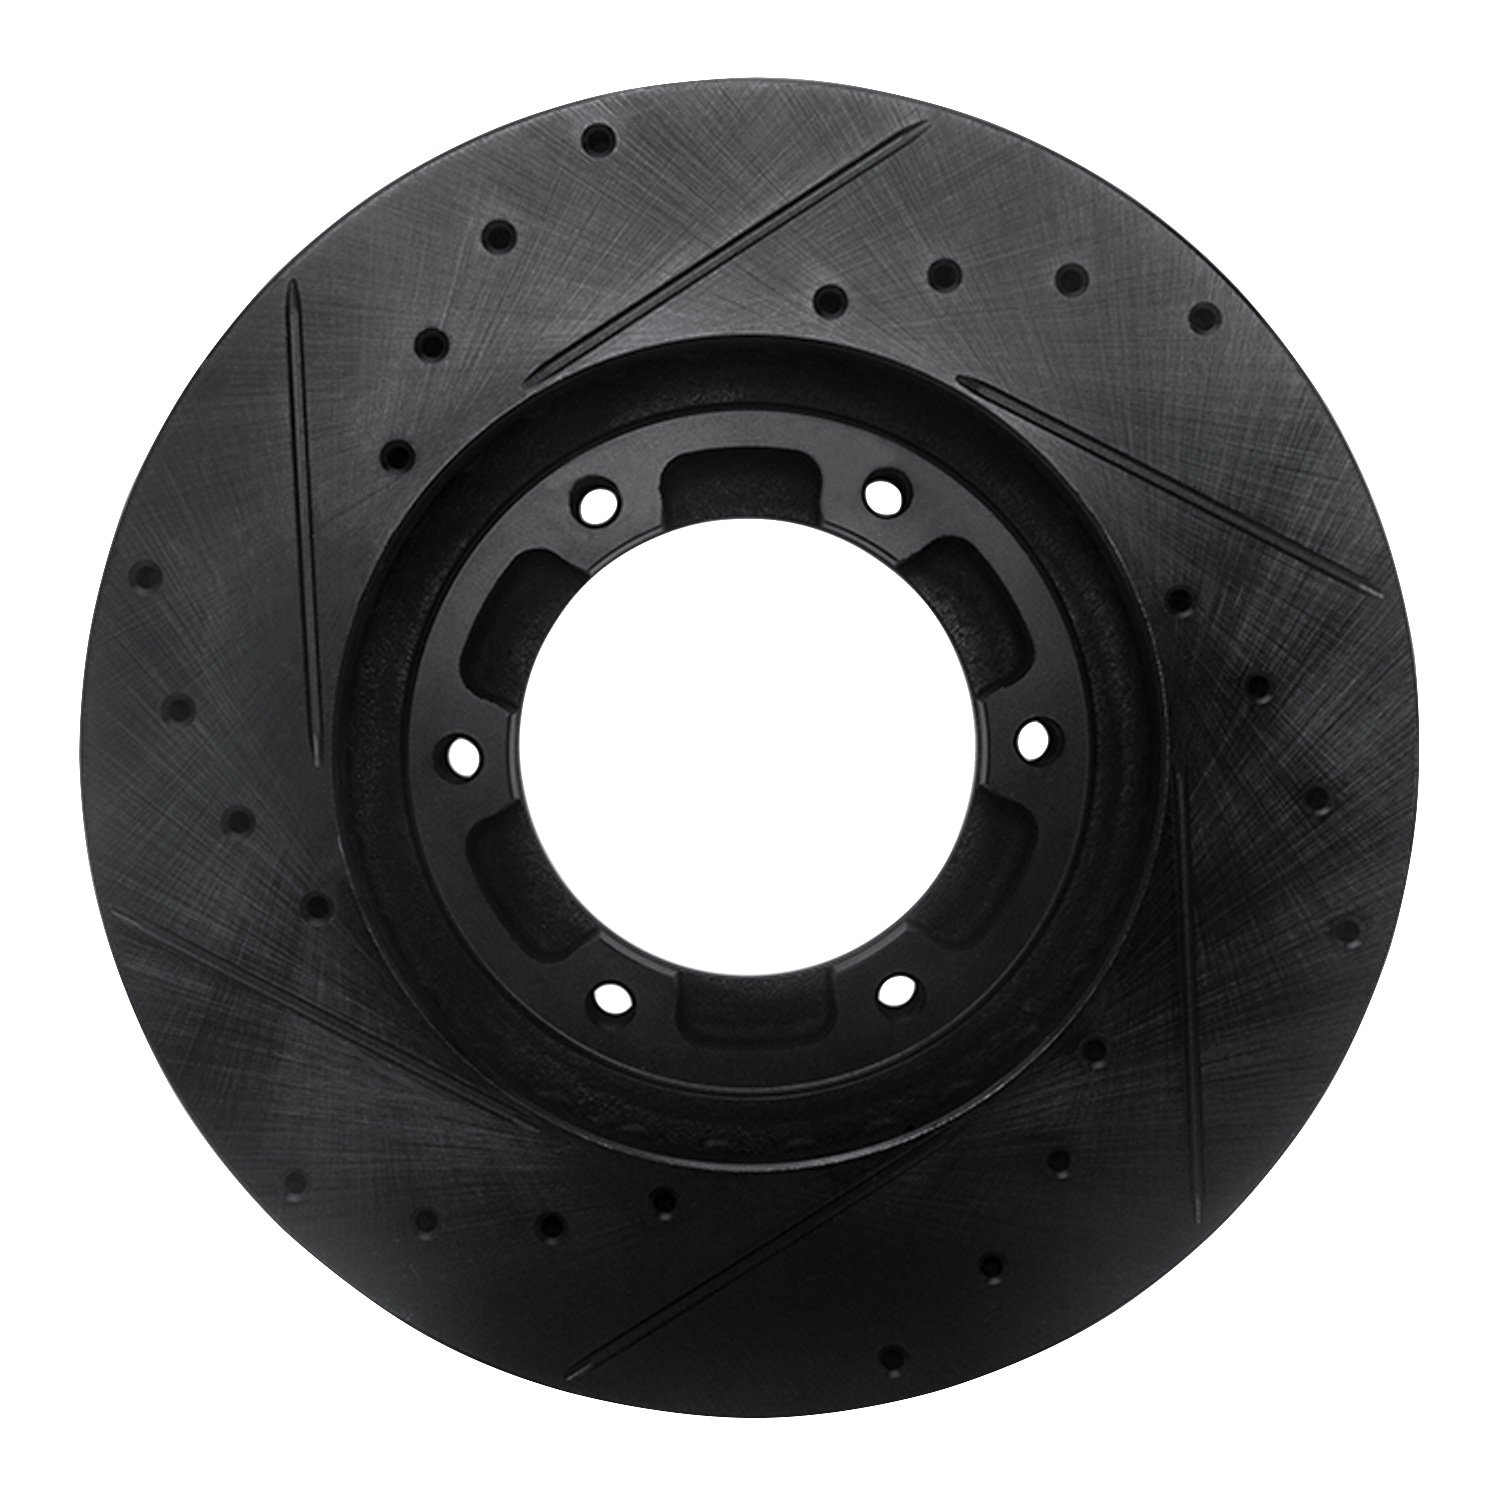 E-Line Drilled & Slotted Black Brake Rotor, 2005-2020 Fits Multiple Makes/Models, Position: Front Right